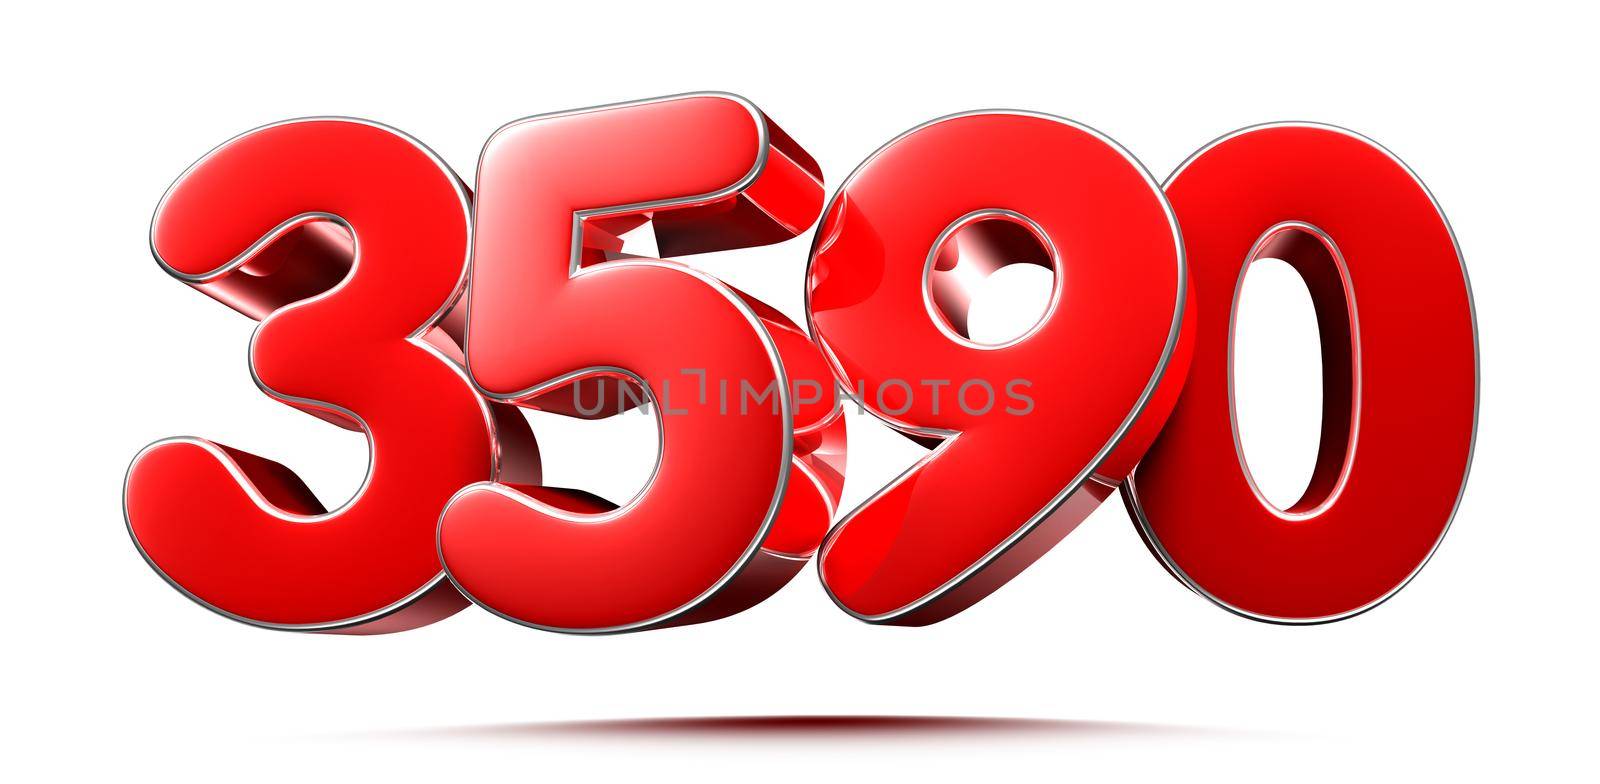 Rounded red numbers 3590 on white background 3D illustration with clipping path